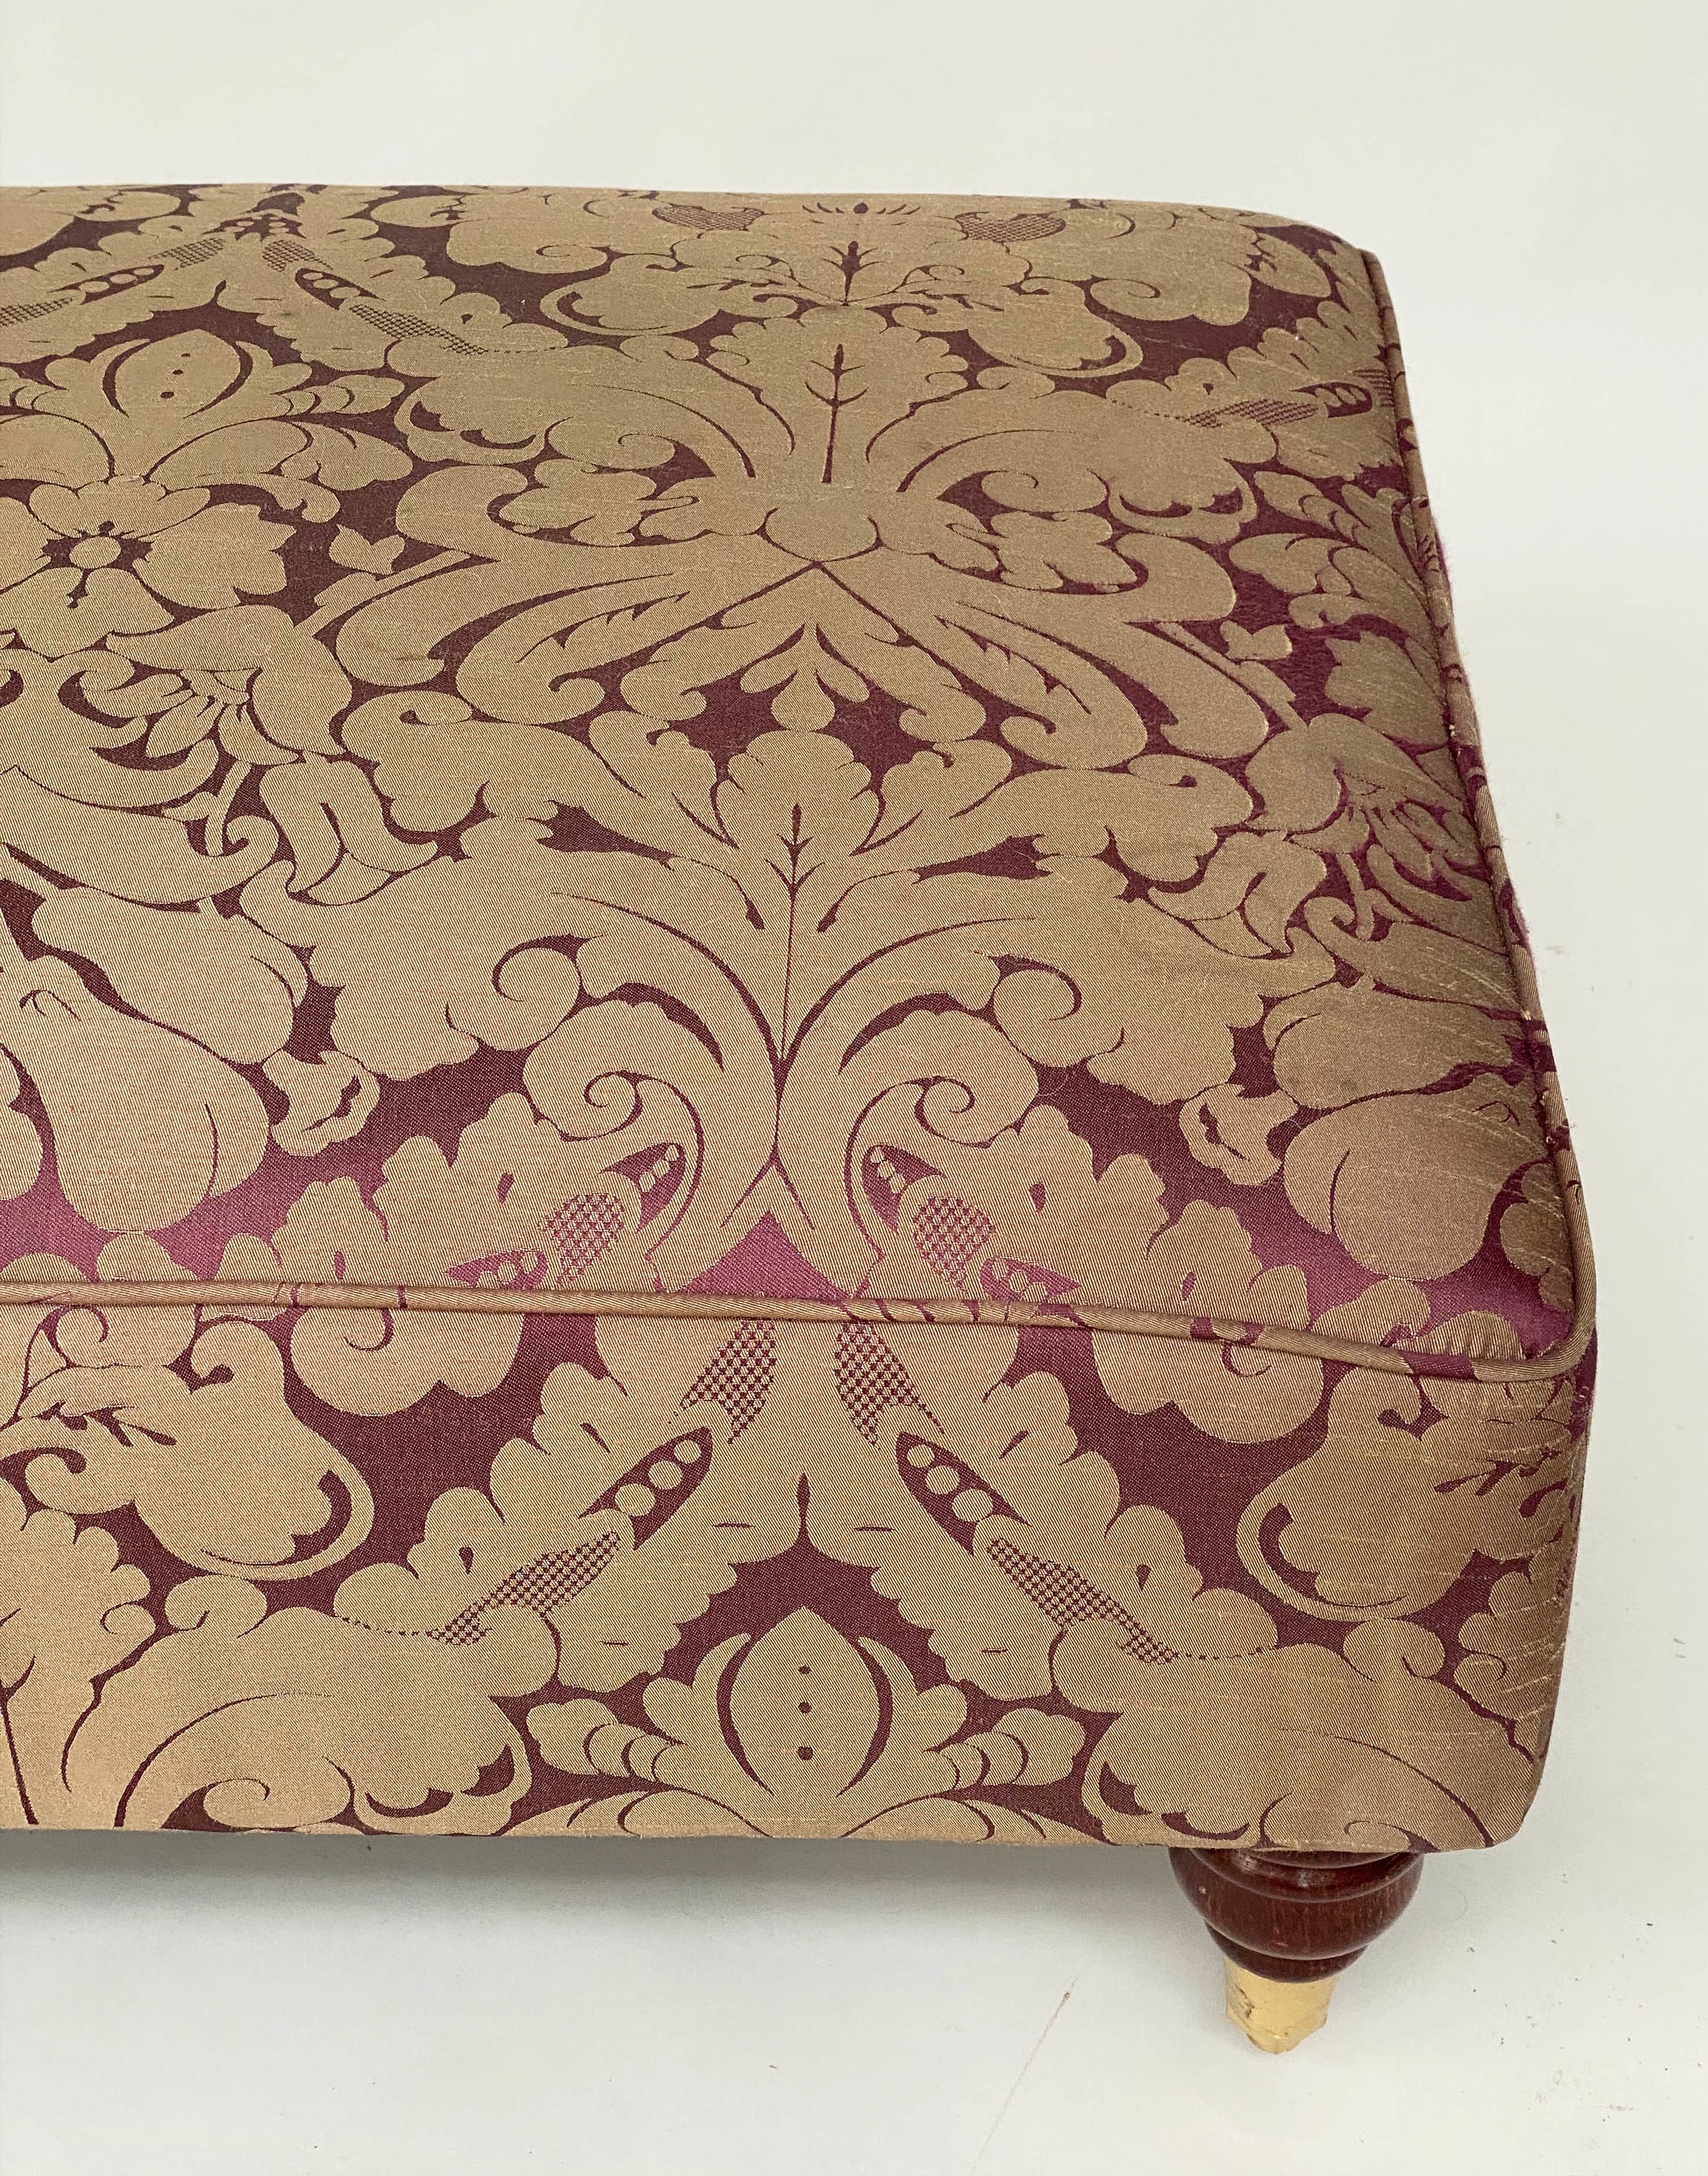 HEARTH STOOL, rectangular with brown/violet brocade pattern and turned supports, 62cm x 110cm x 35cm - Image 4 of 4